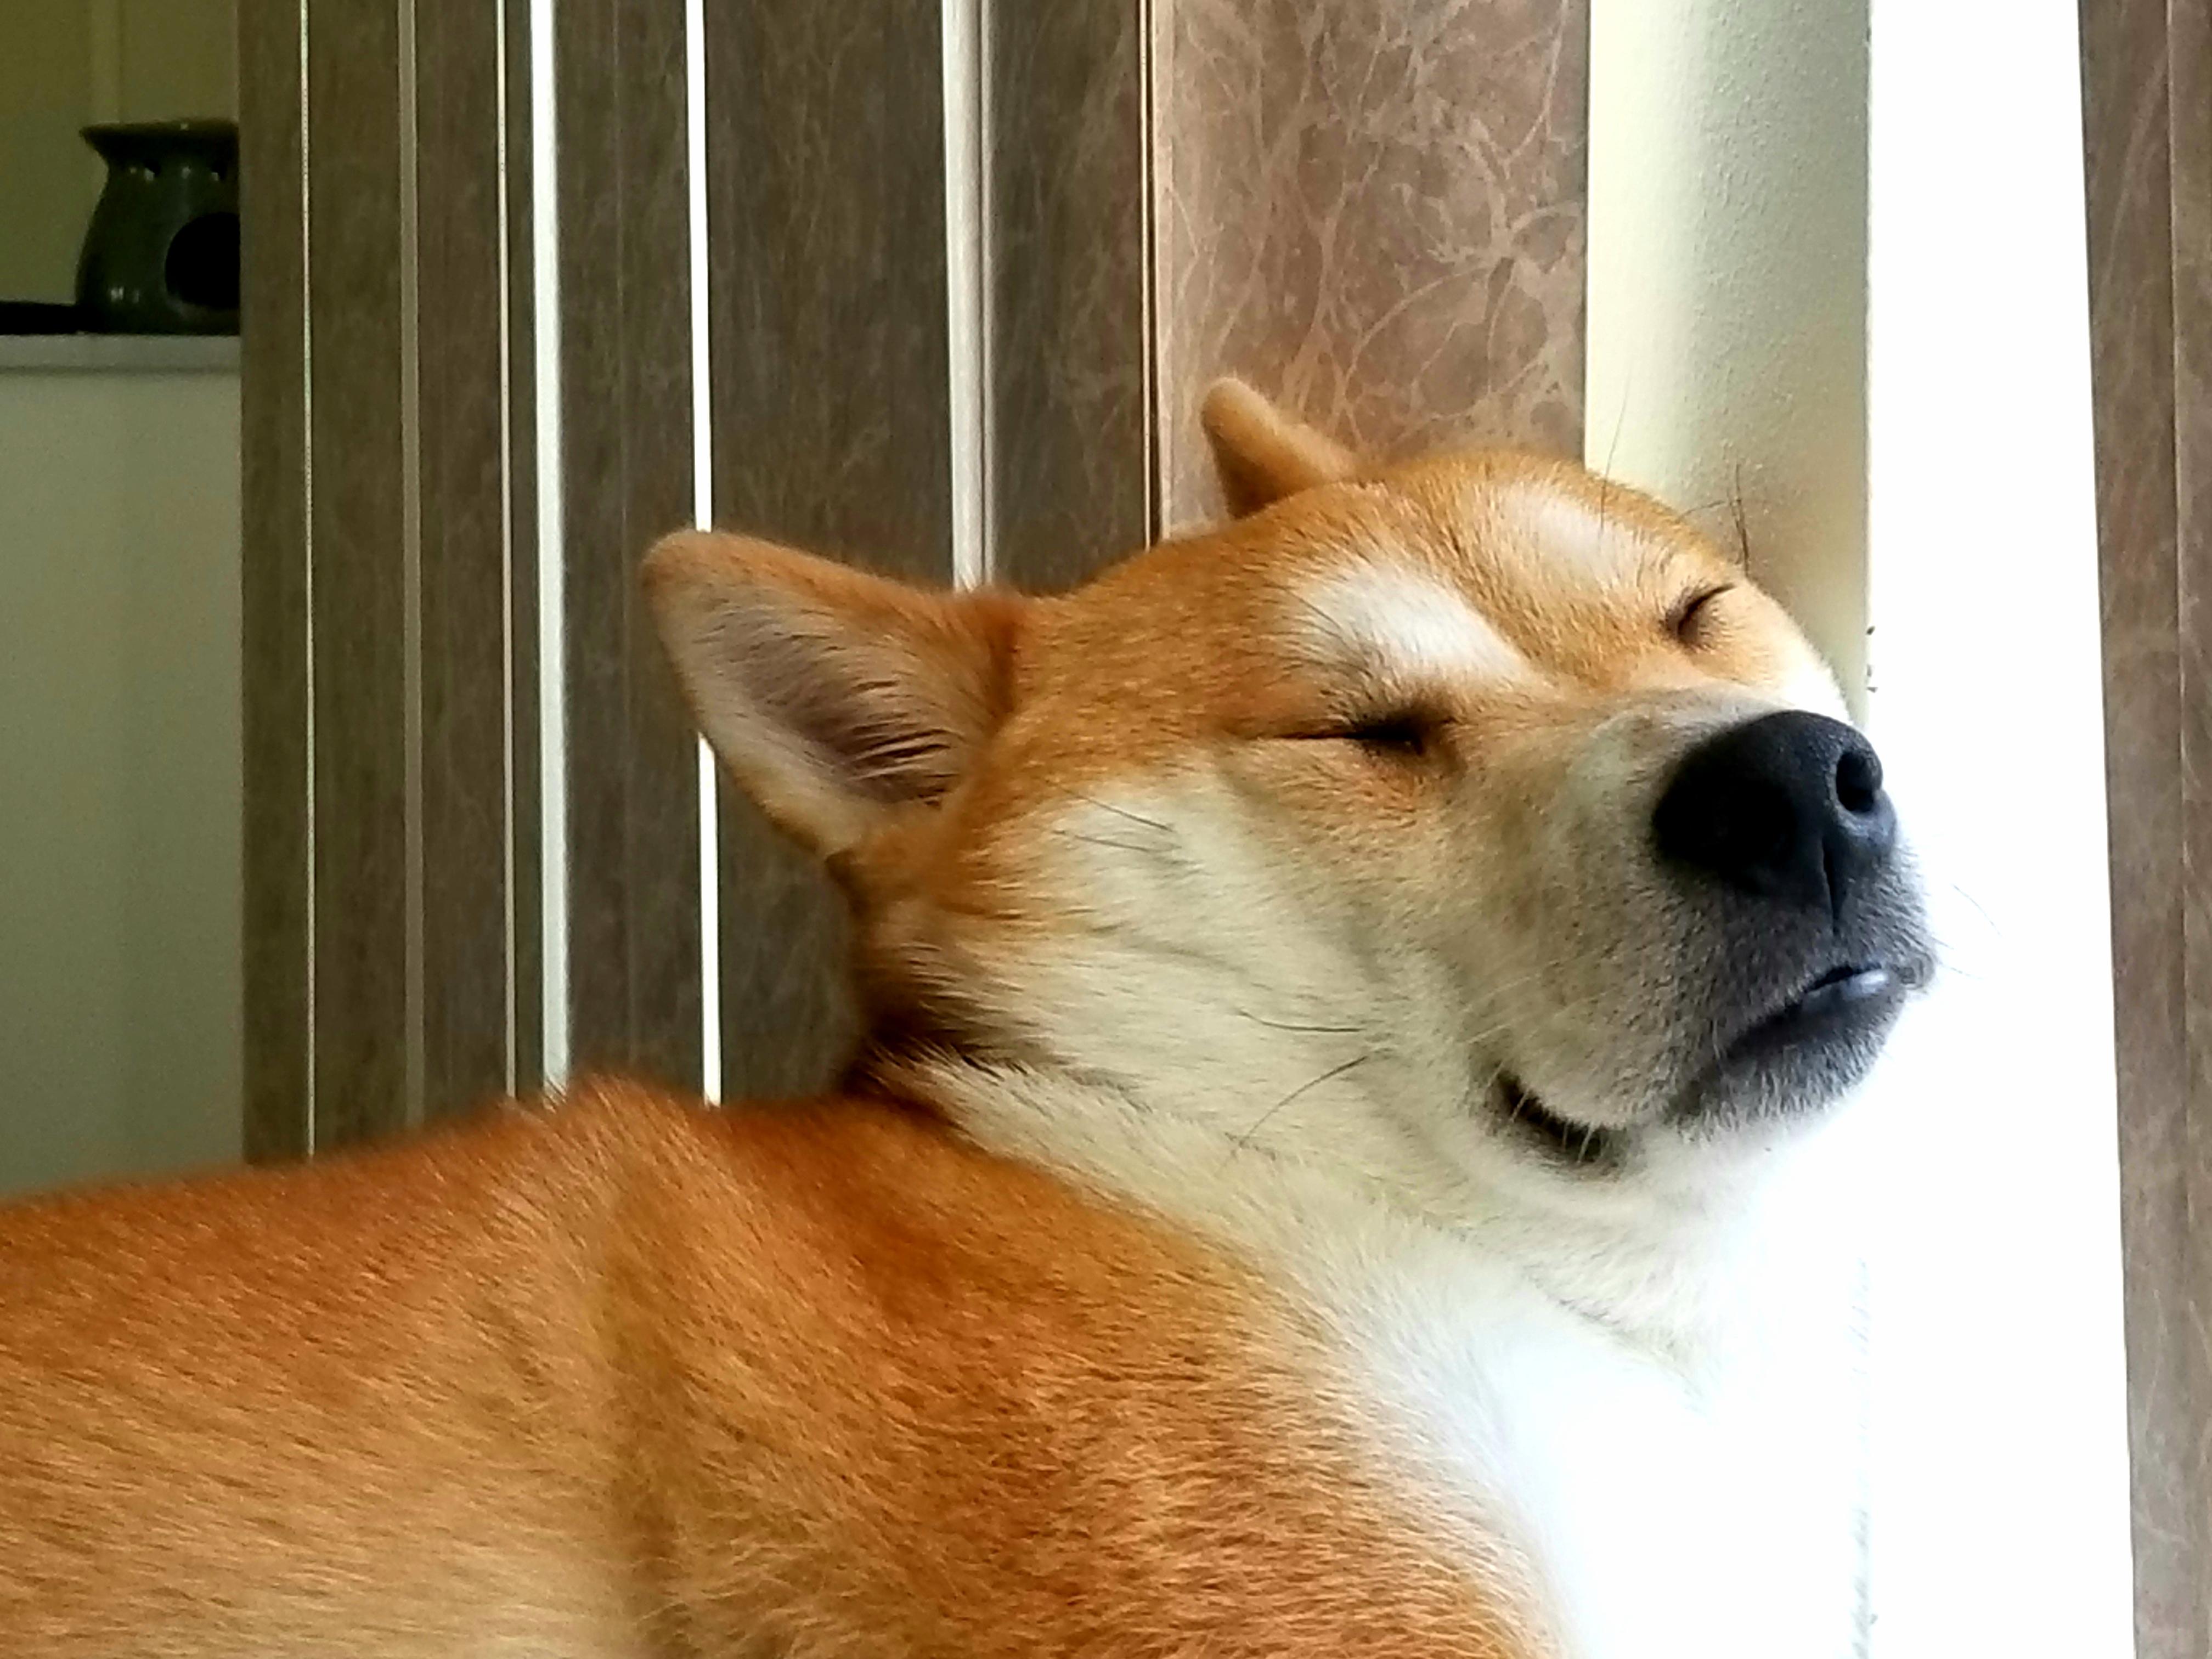 Shiba Inu leaning its face against the window while sleeping